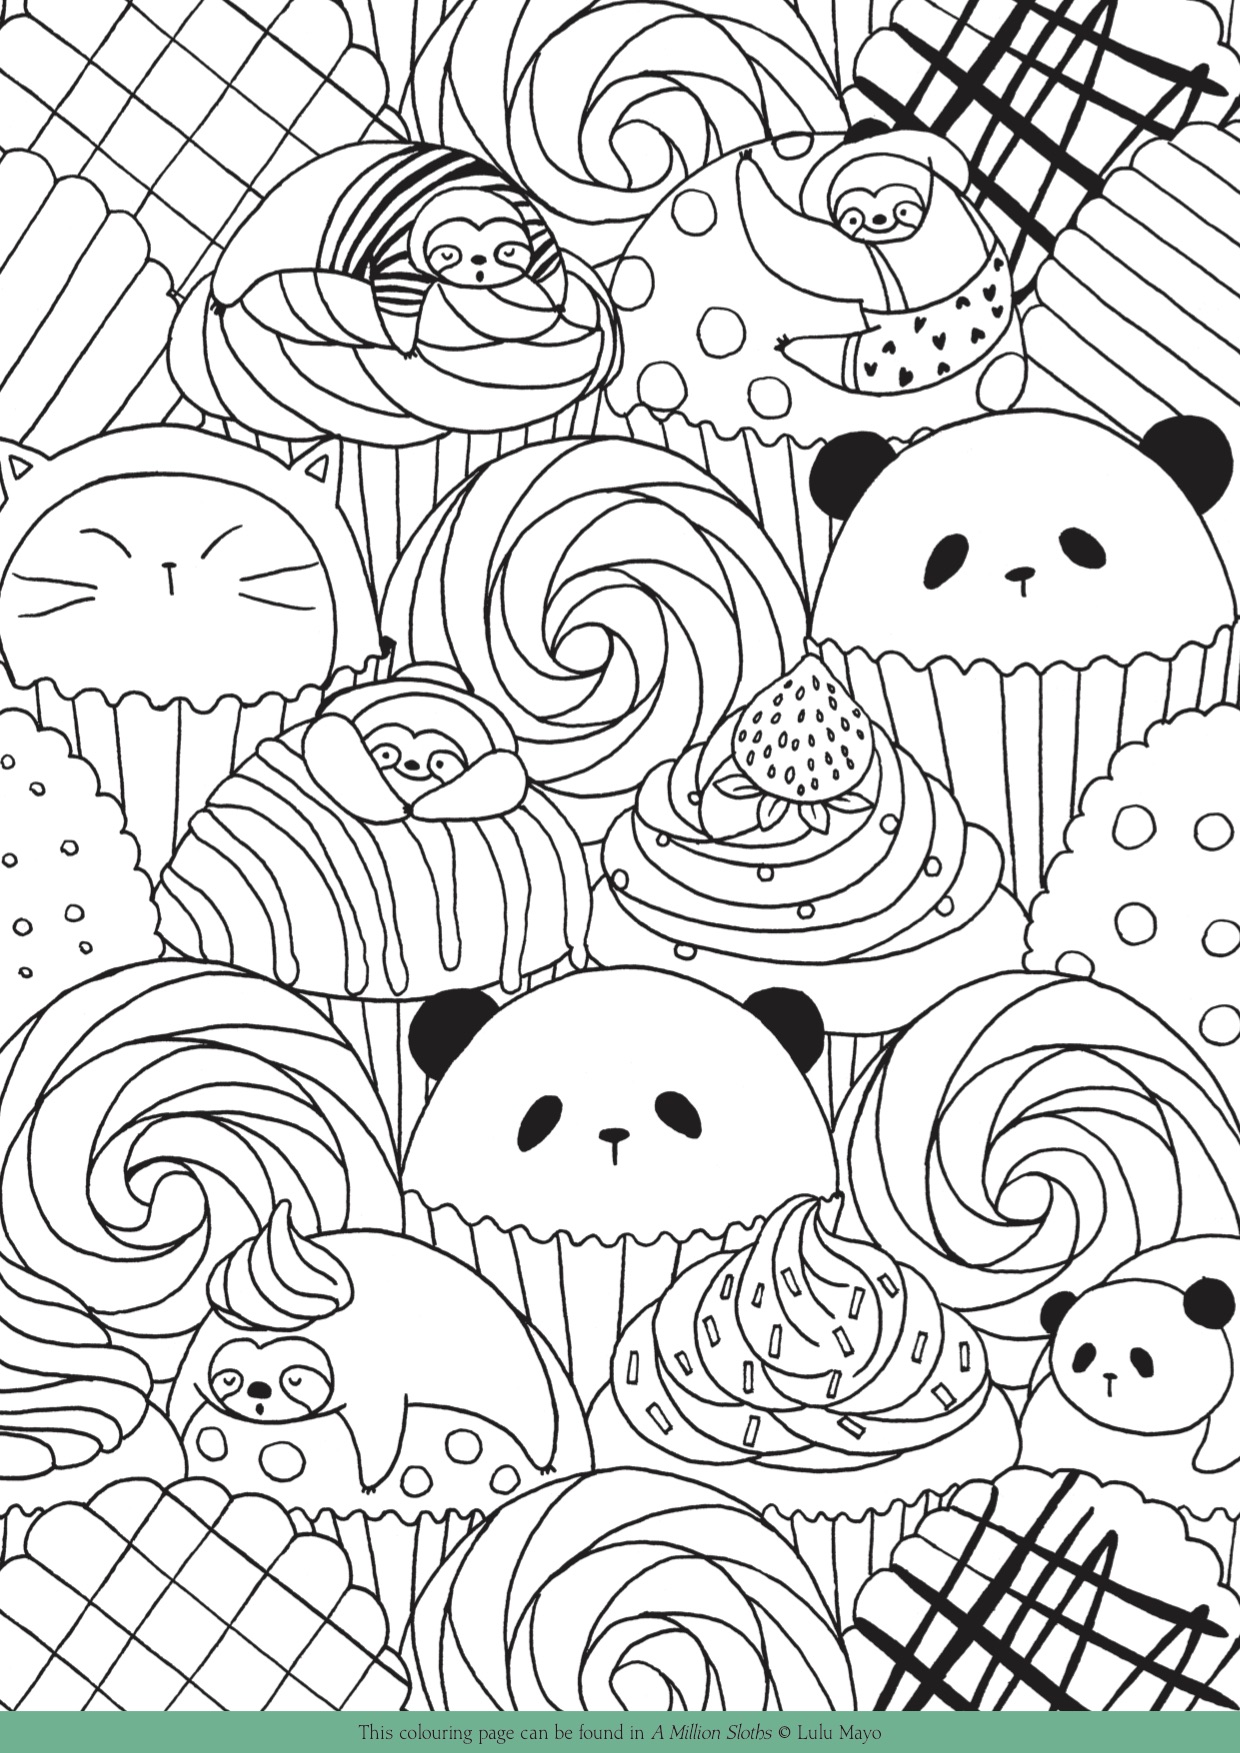 Download Free Downloadable Colouring Pages for Adults - Michael O ...